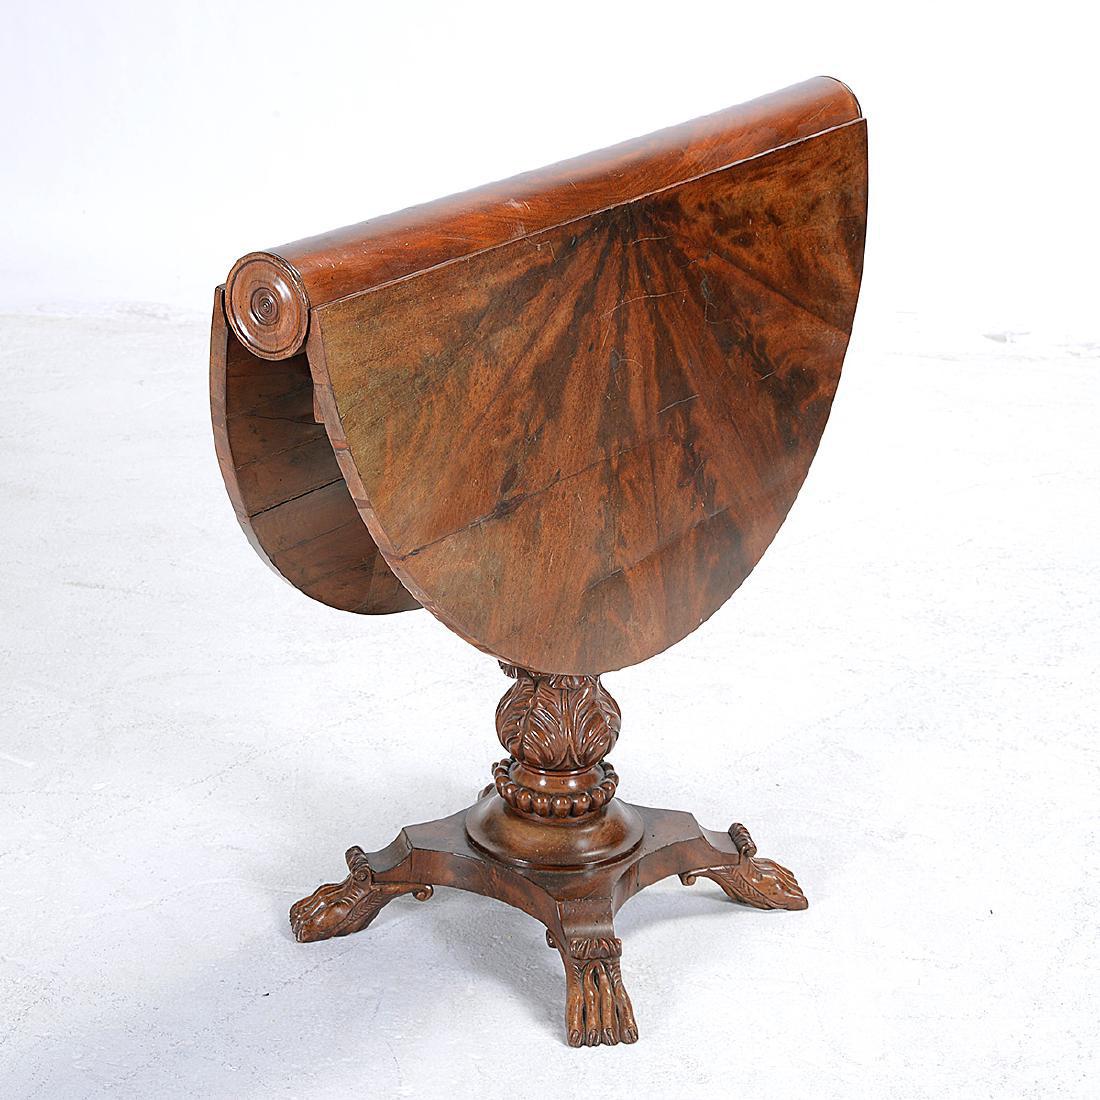 Hand-Carved American Renaissance Revival Butterfly Table, 19th Century